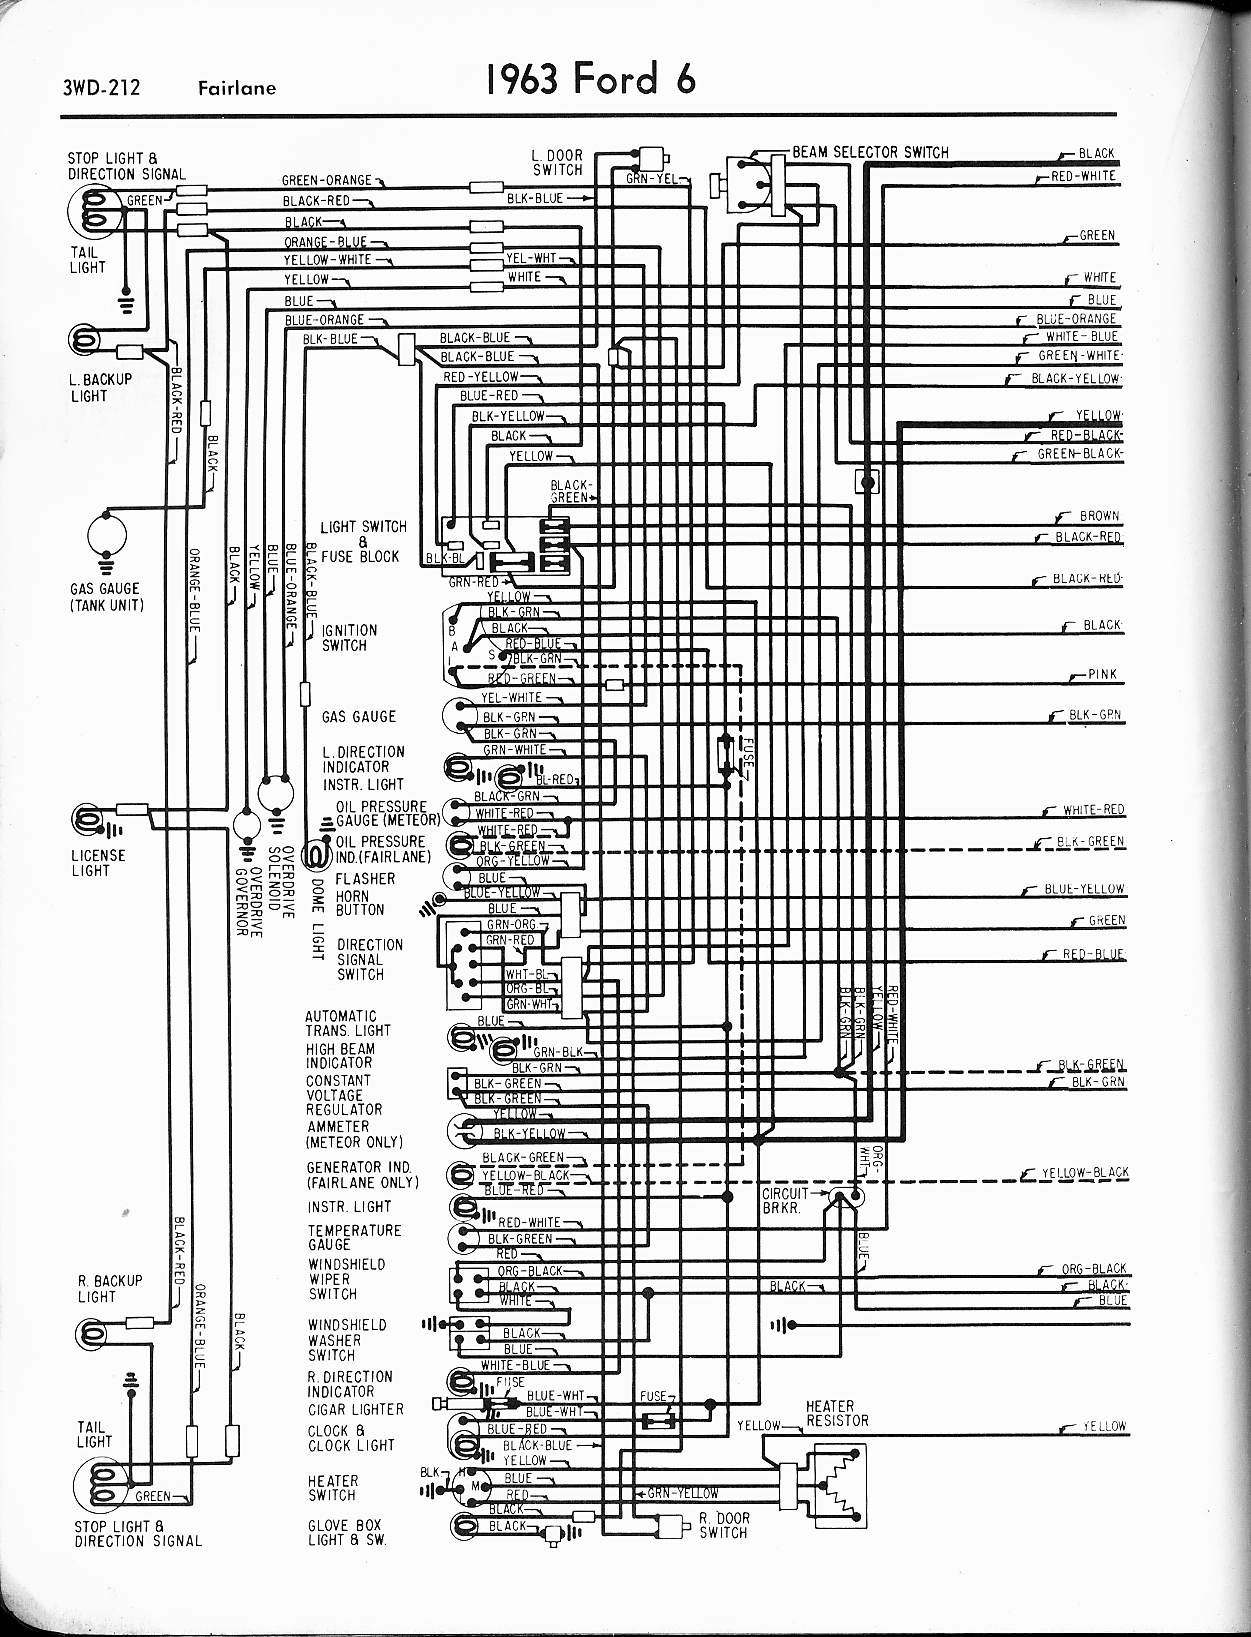 Wiring Diagram For 1963 Ford Auto Dimmer Switch from www.oldcarmanualproject.com